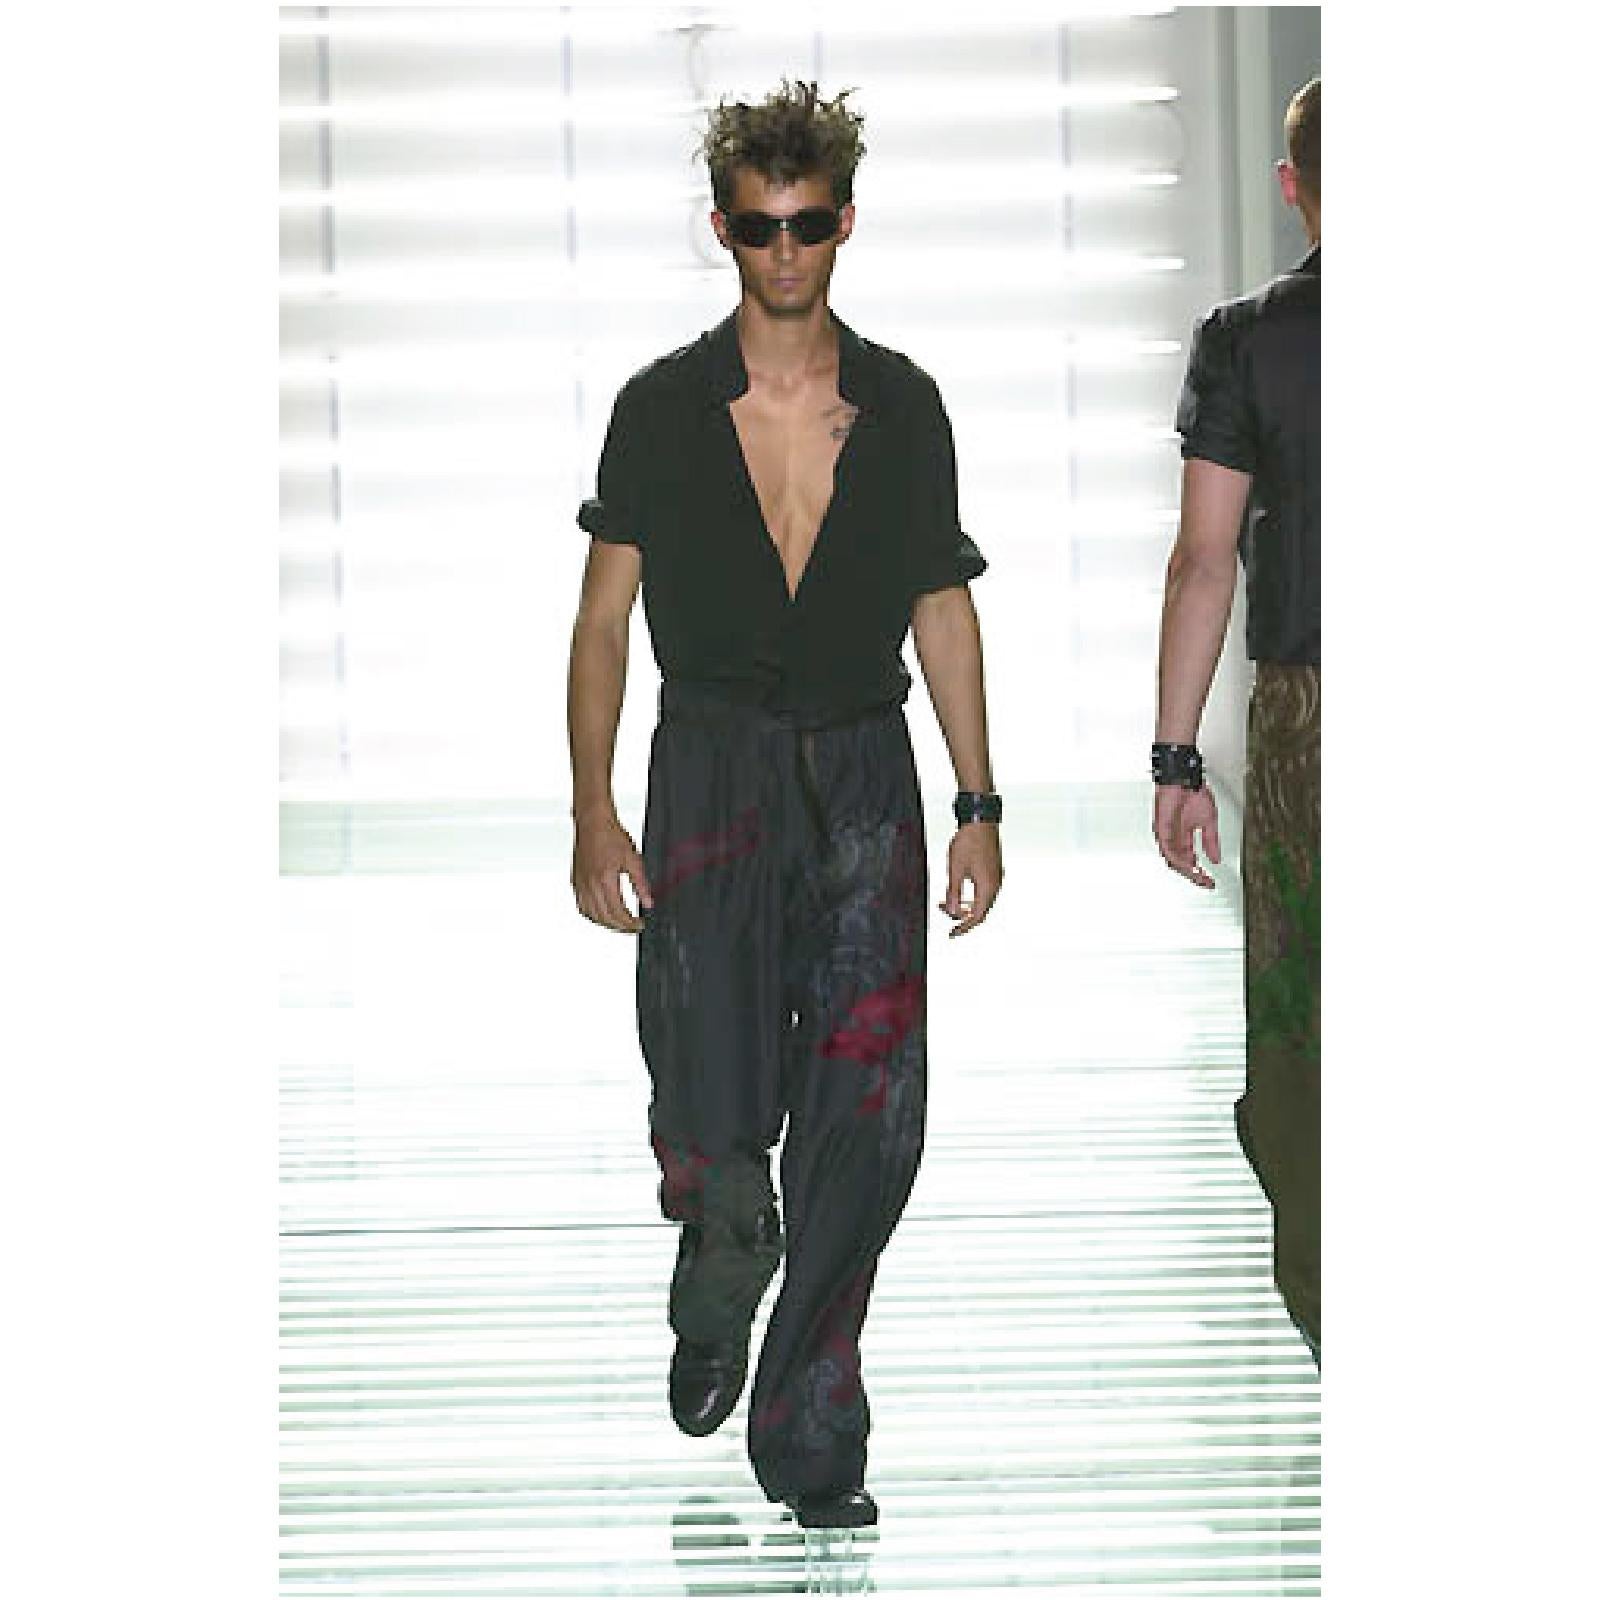 GUCCI by TOM FORD Spring Summer 2001 Collection karate style pants come in black silk with burgundy and gray dragon embroidery throughout, button fly, tied drawstring waistband, and quilted hem. Wear. Made in Italy.
 
Very Good Pre-Owned